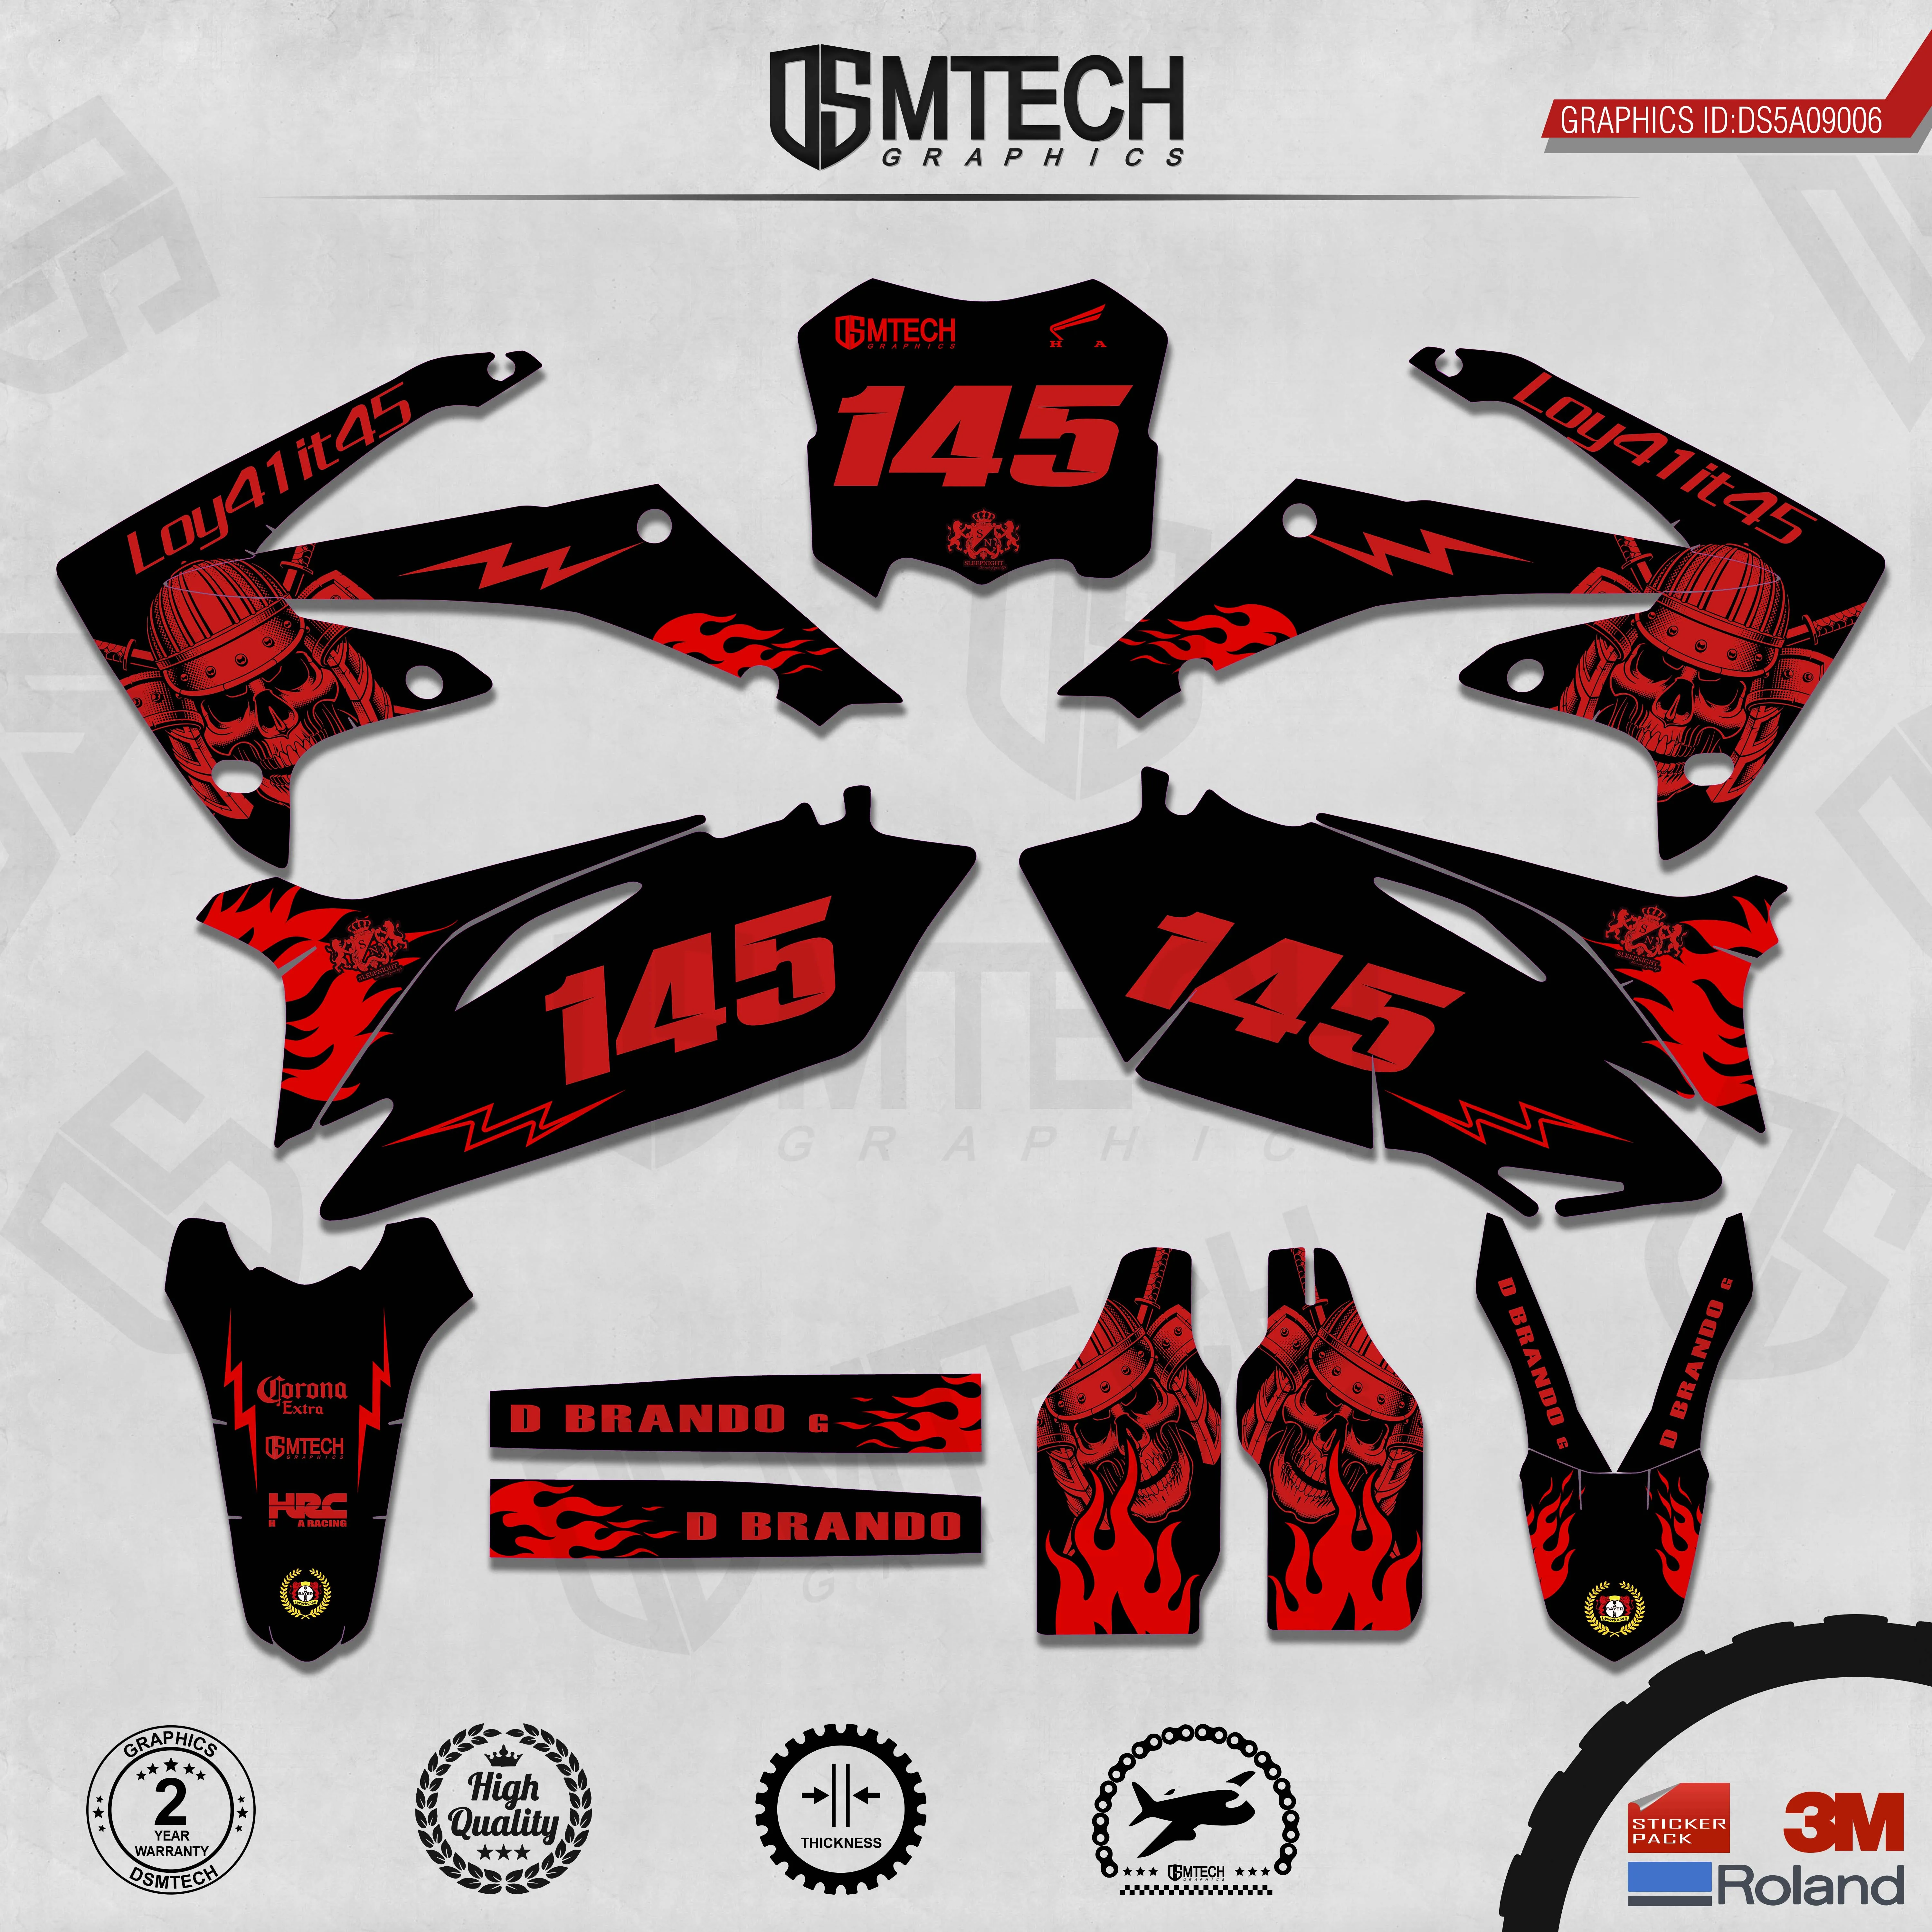 DSMTECH Customized Team Graphics Backgrounds Decals 3M Custom Stickers For 2010-2013 CRF250R 2009-2012 CRF450R 006